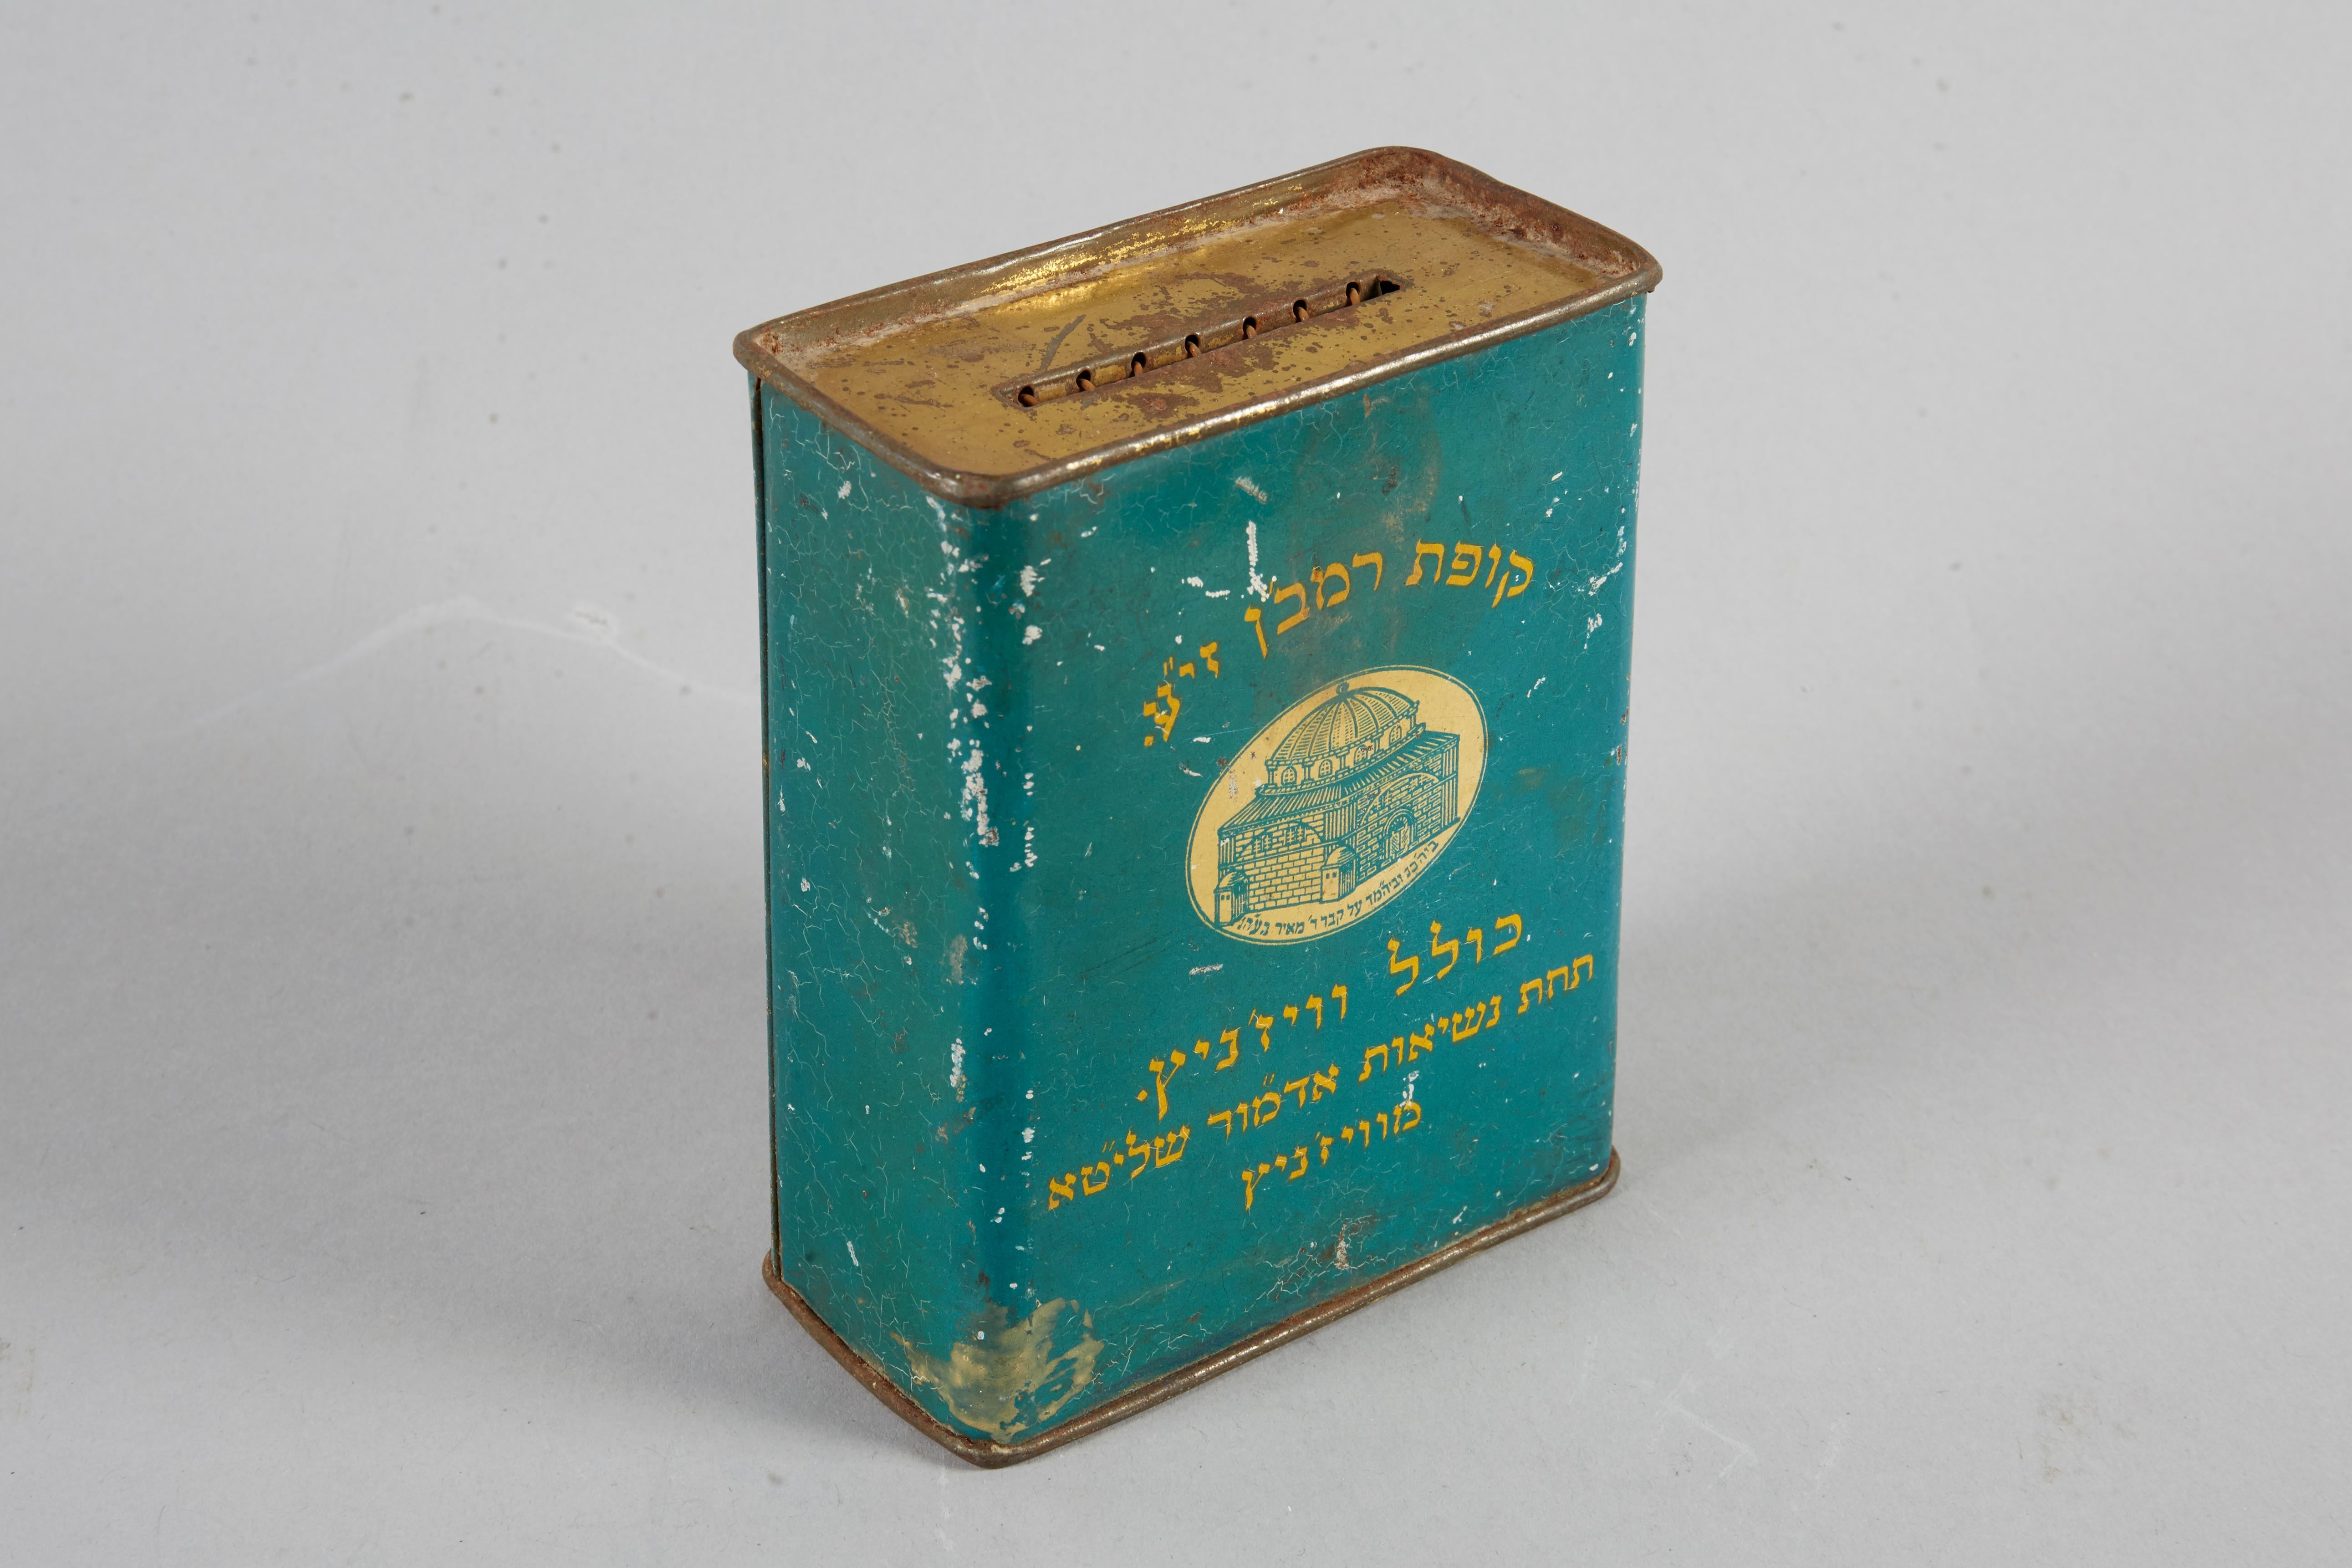 Blue Tin charity box, Jerusalem, Israel, circa 1935.
Inscribed in Hebrew in the front: 